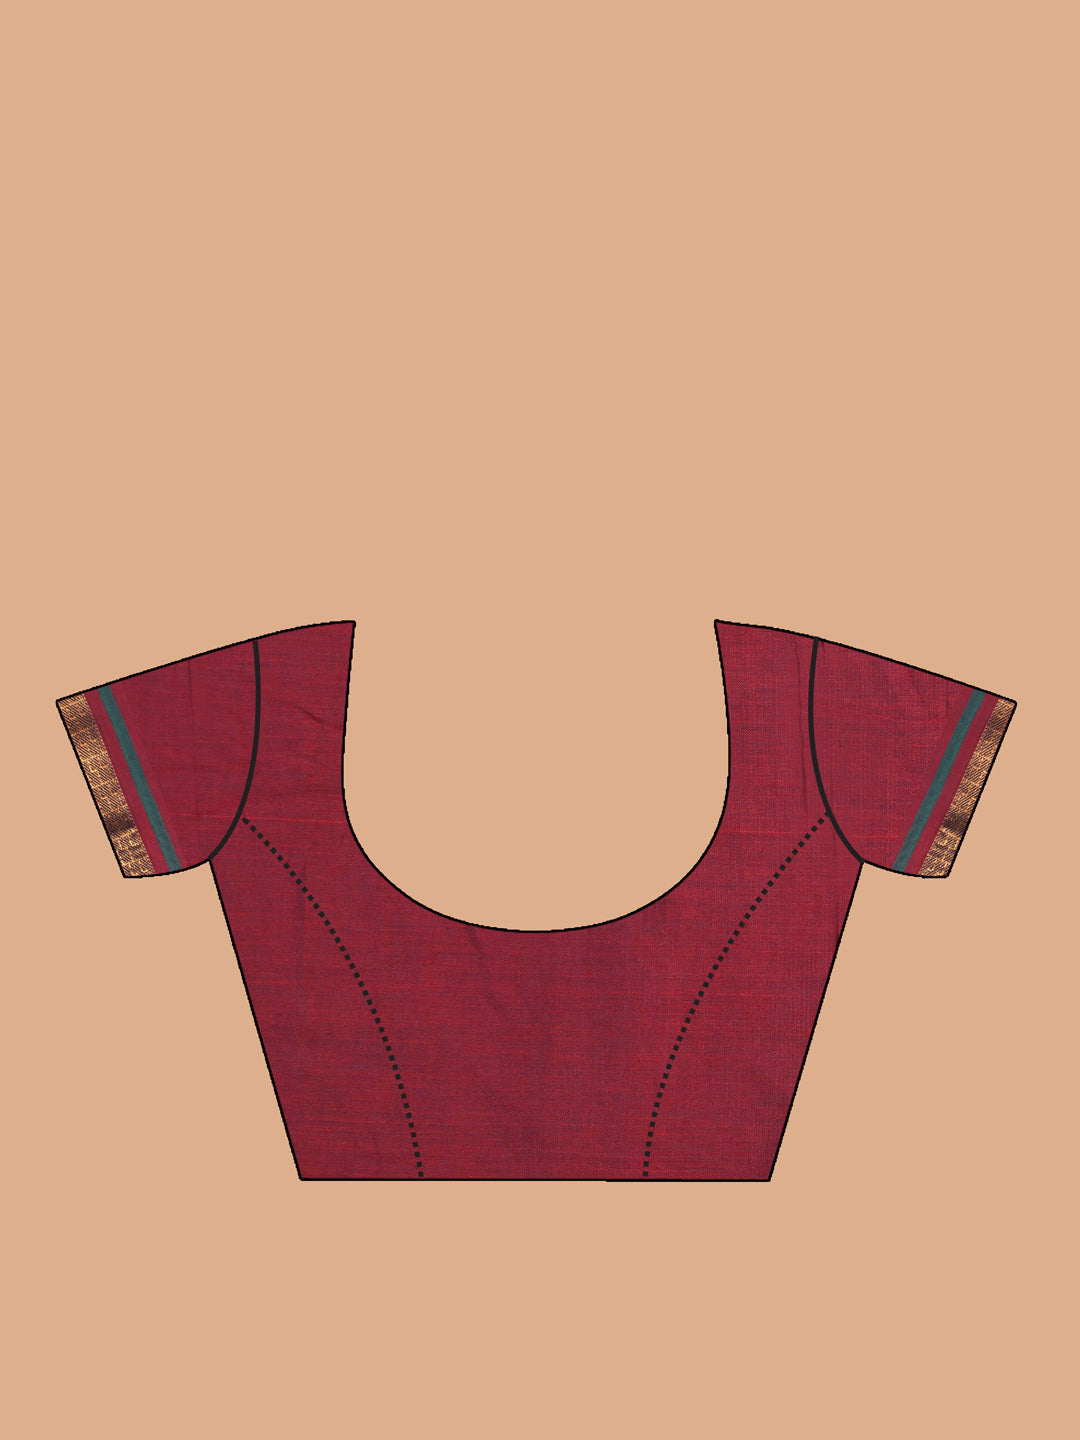 Indethnic Maroon Pure Cotton Solid Saree - Blouse Piece View